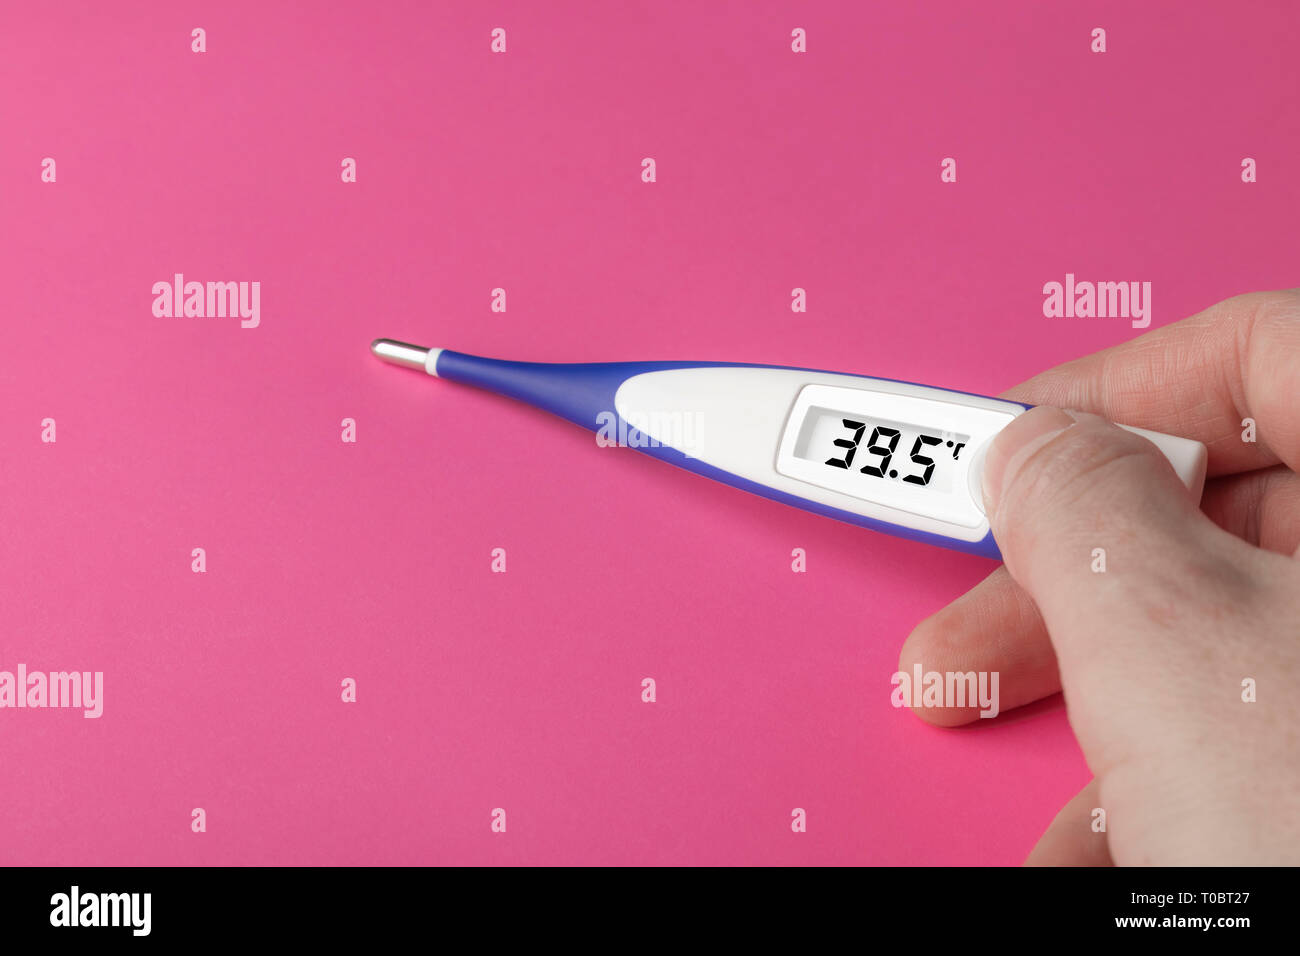 White-blue thermometer with a high temperature of 39.5 degrees Celsius in hand on a pink background Stock Photo